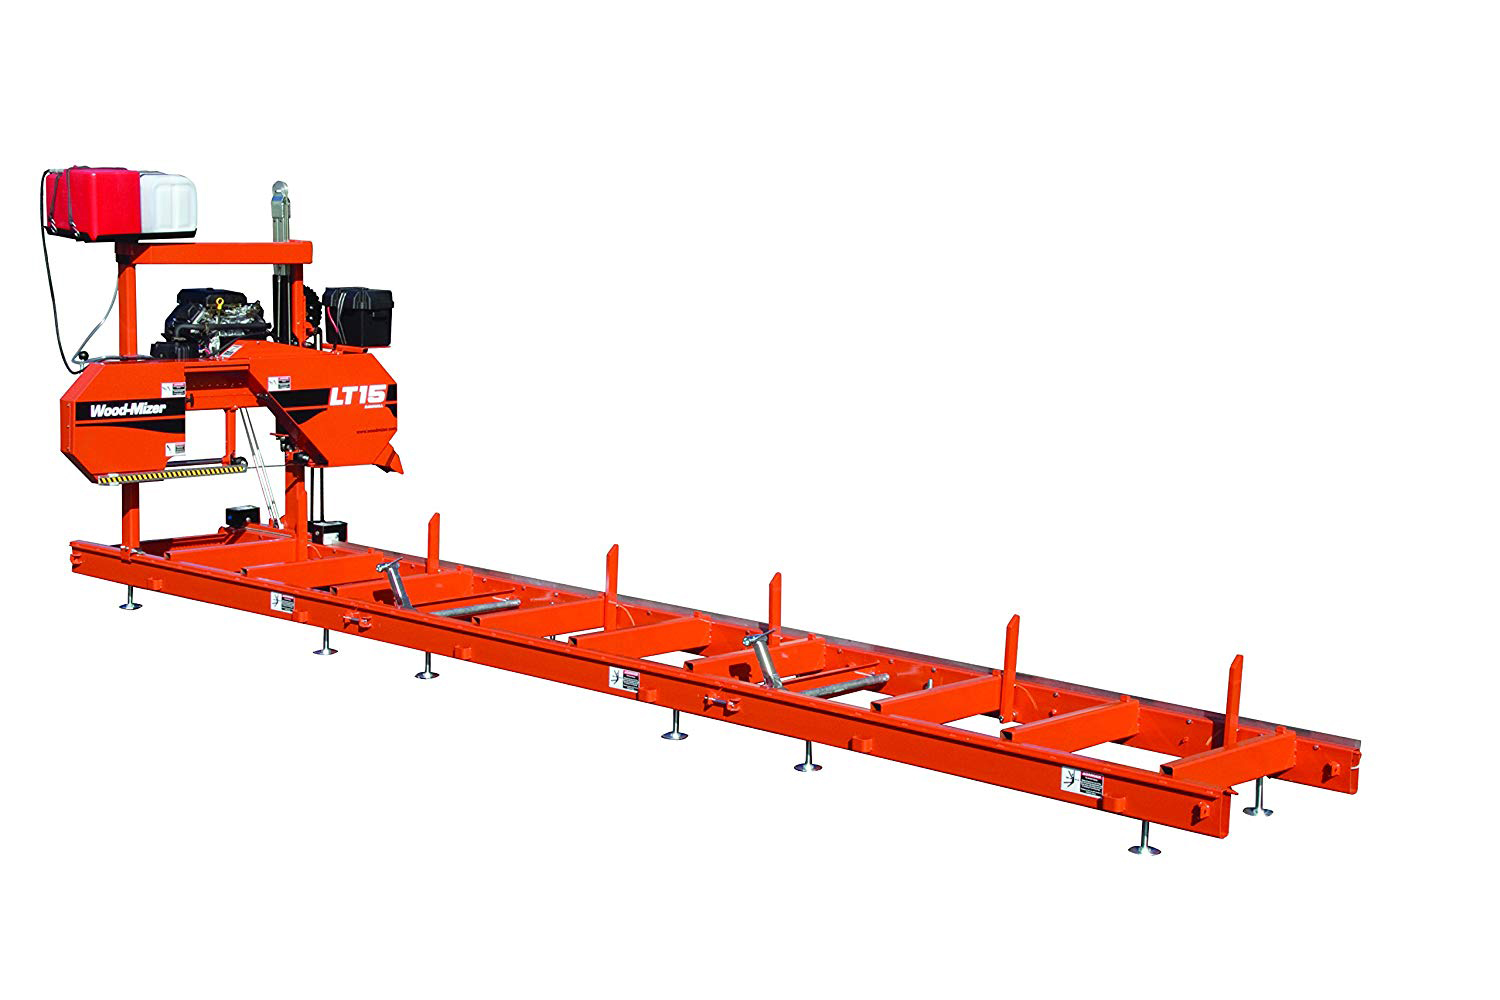 Wood-Mizer LT15 Portable Sawmill with 19 HP Gas Engine